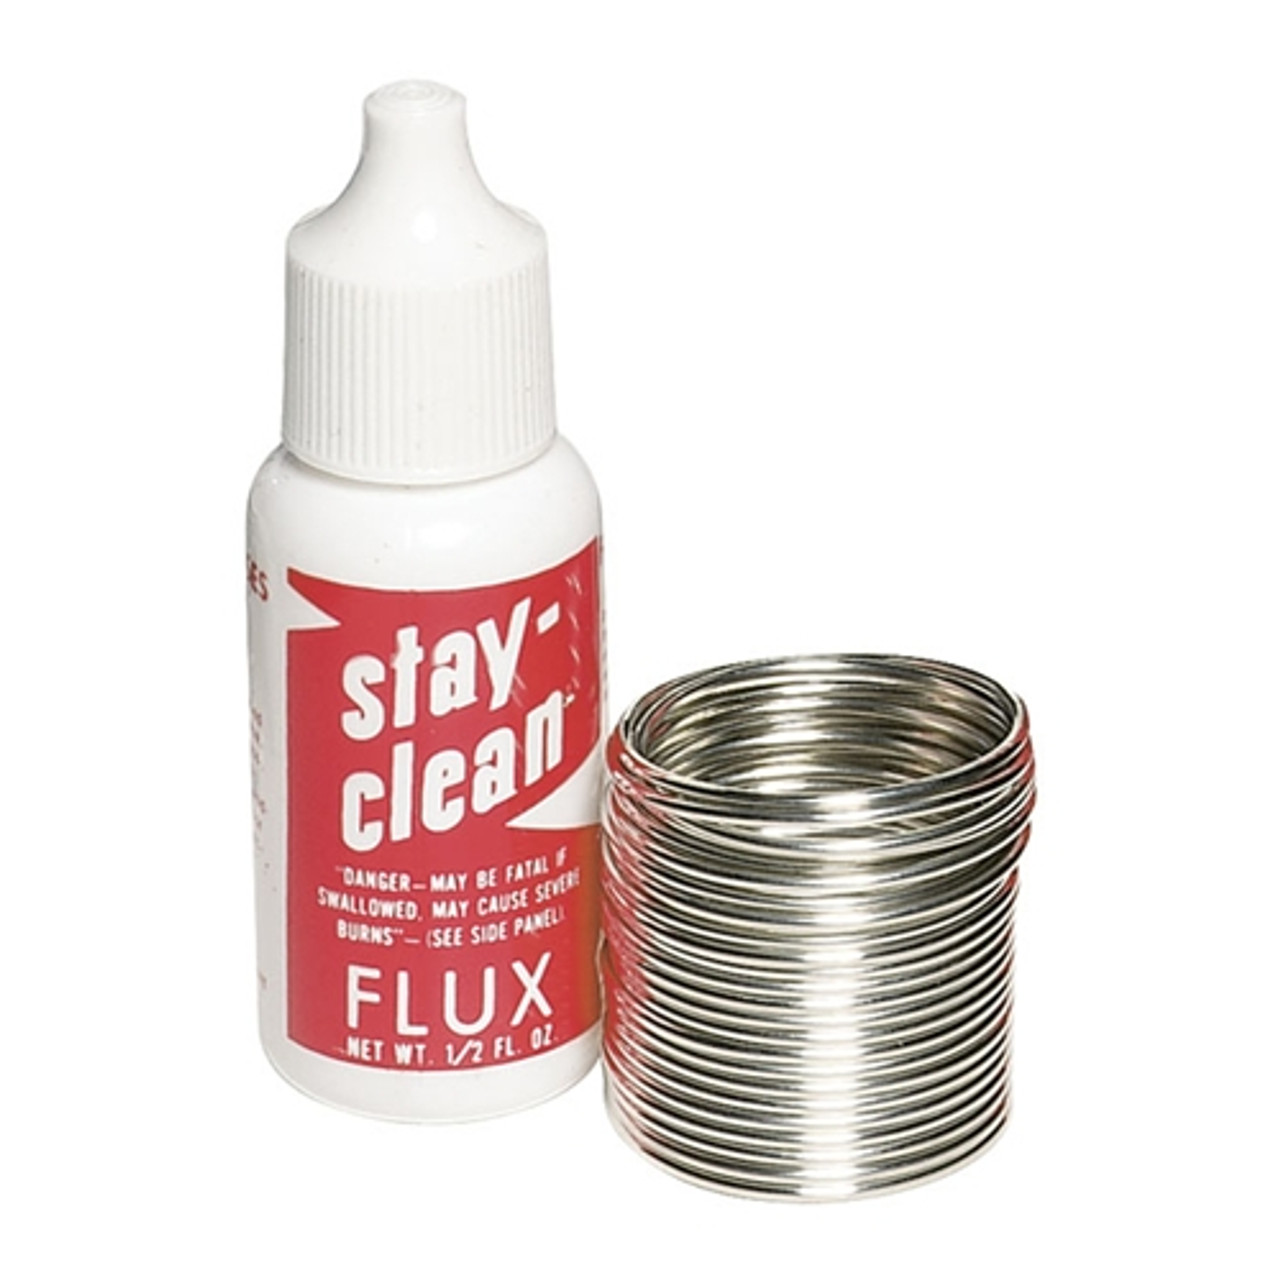 Stay Clean Flux - Refill only (4 oz.)